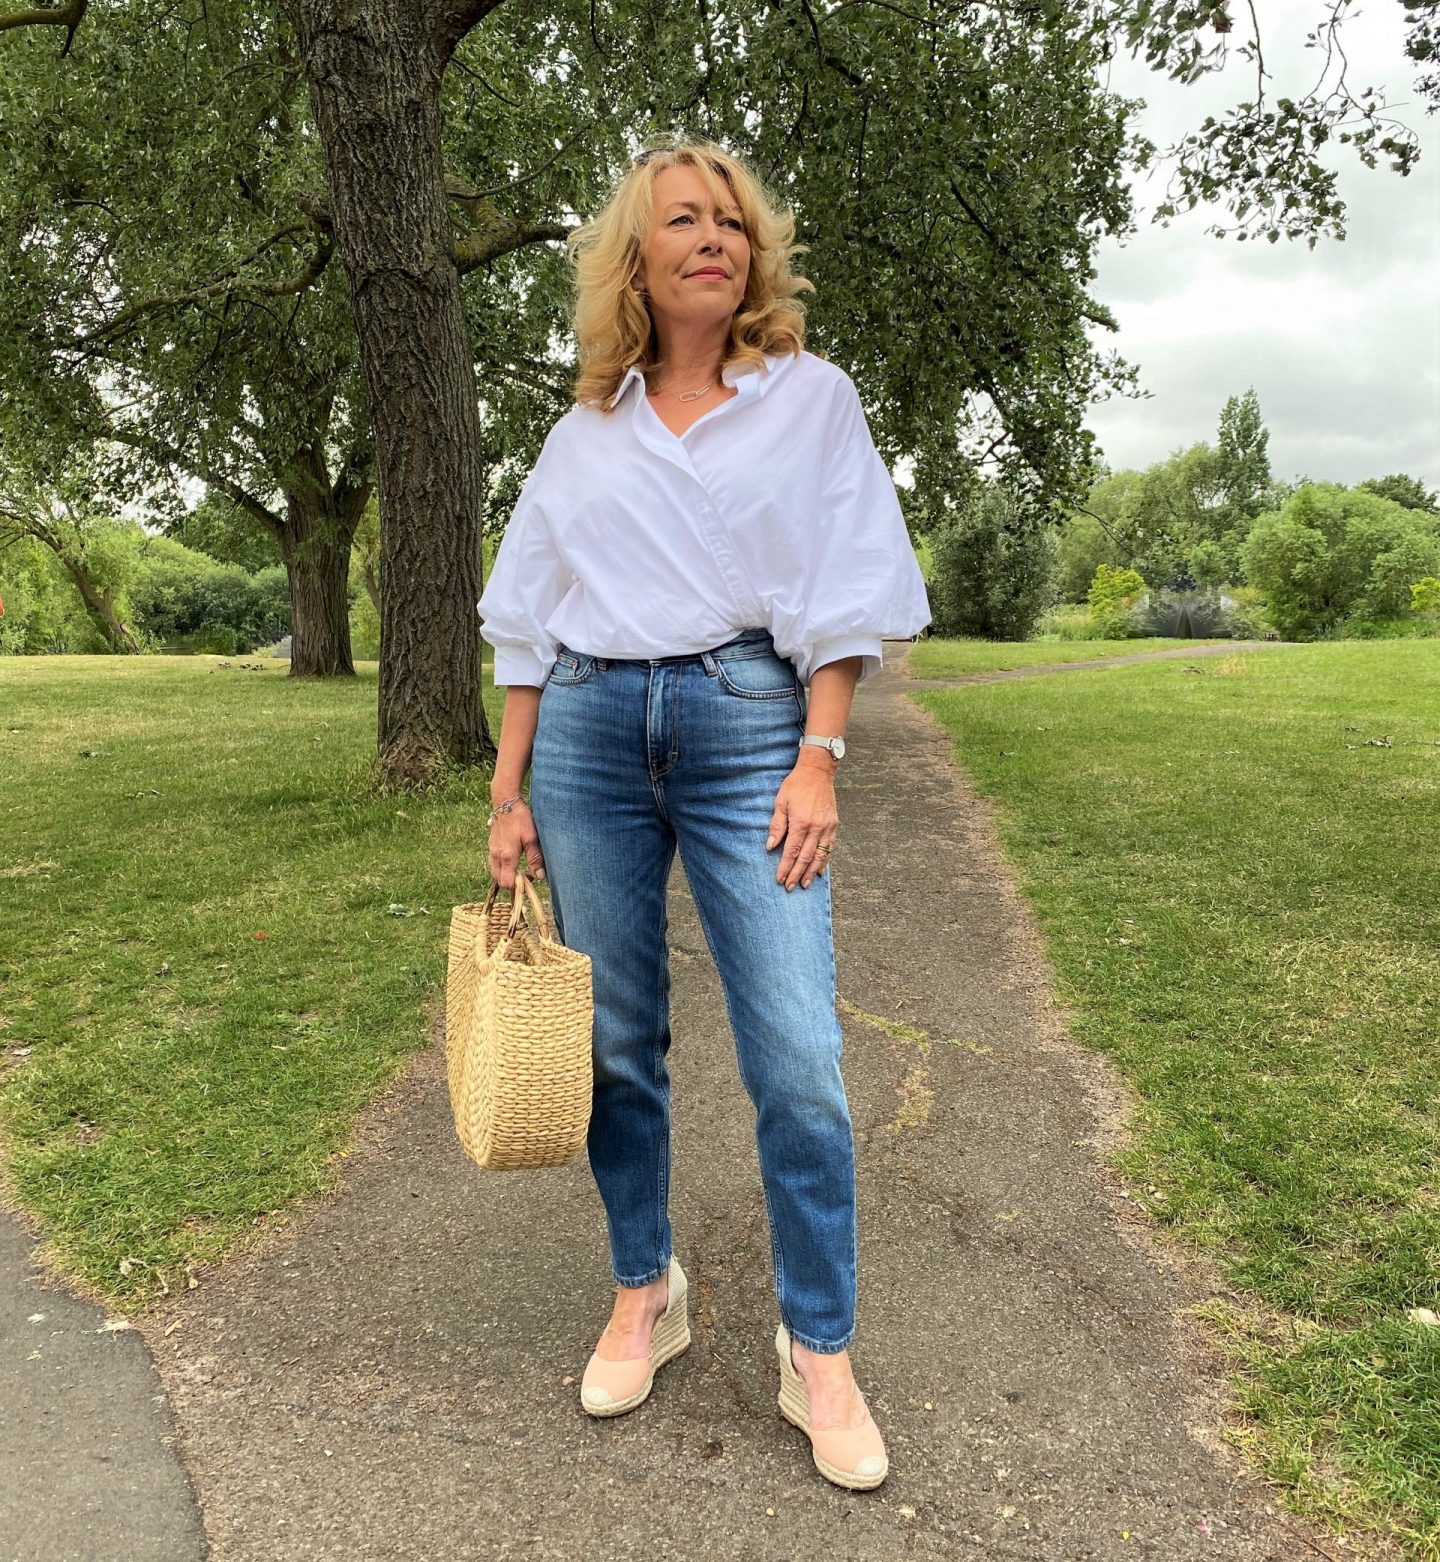 The puff sleeves trend is still going strong. I love this comfortable easy to wear style. Tuck in or leave loose for a relaxed feel